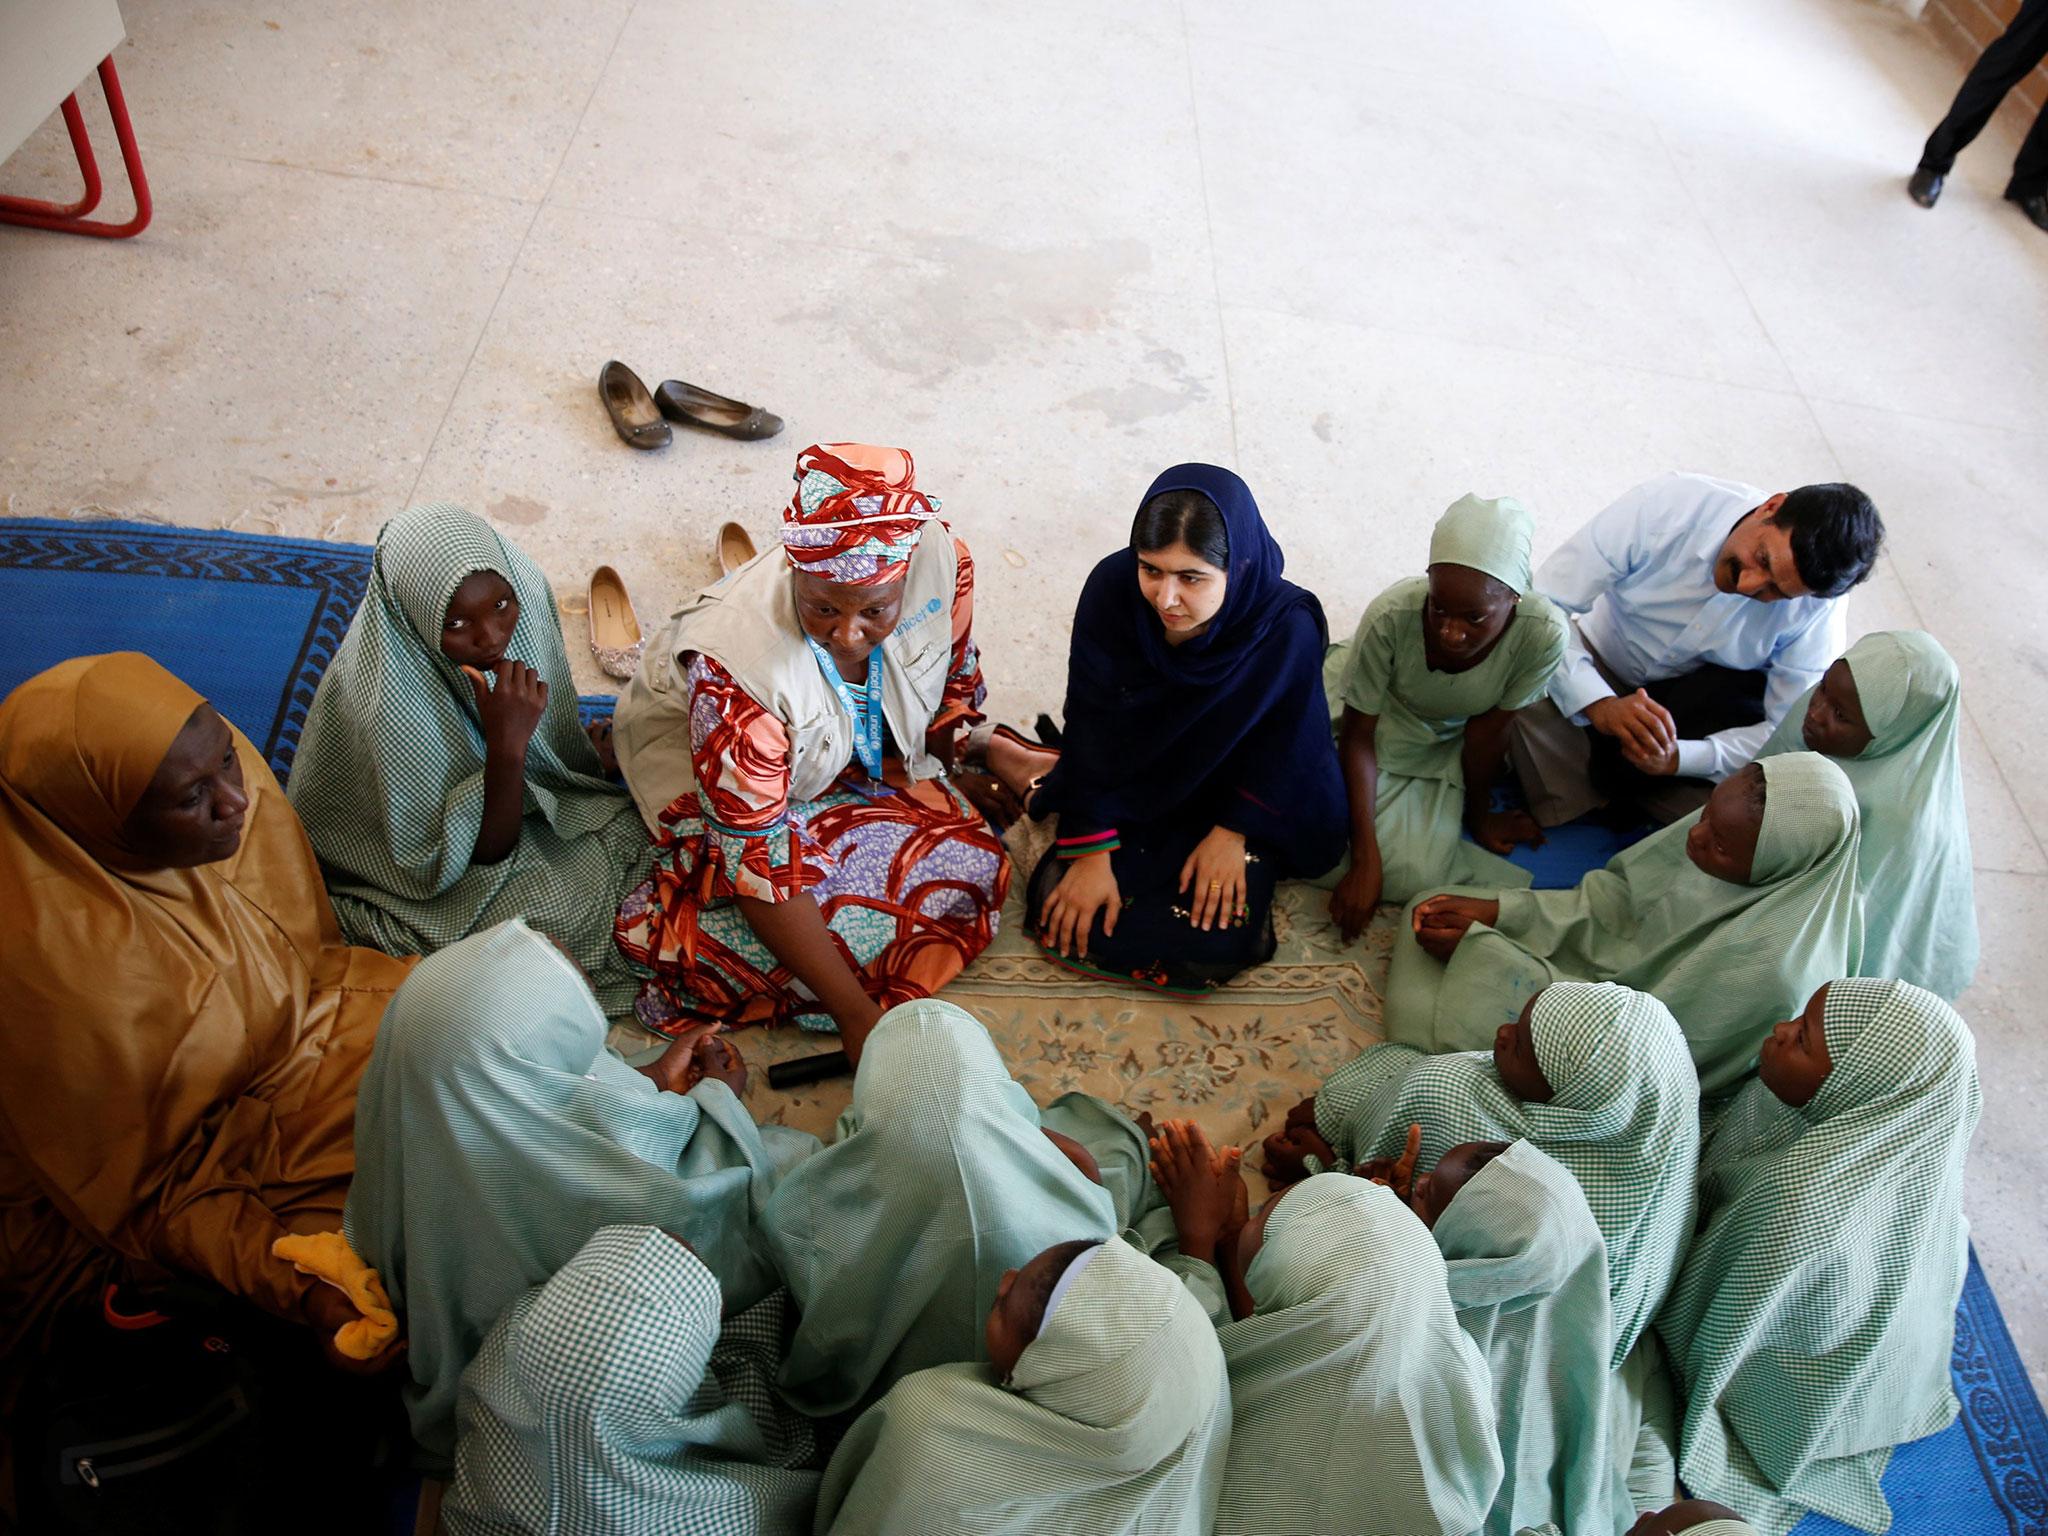 Nobel laureate Malala Yousafzai seen in a group discussion with some of the student of Yerwa Girls school in Maiduguri, Nigeria